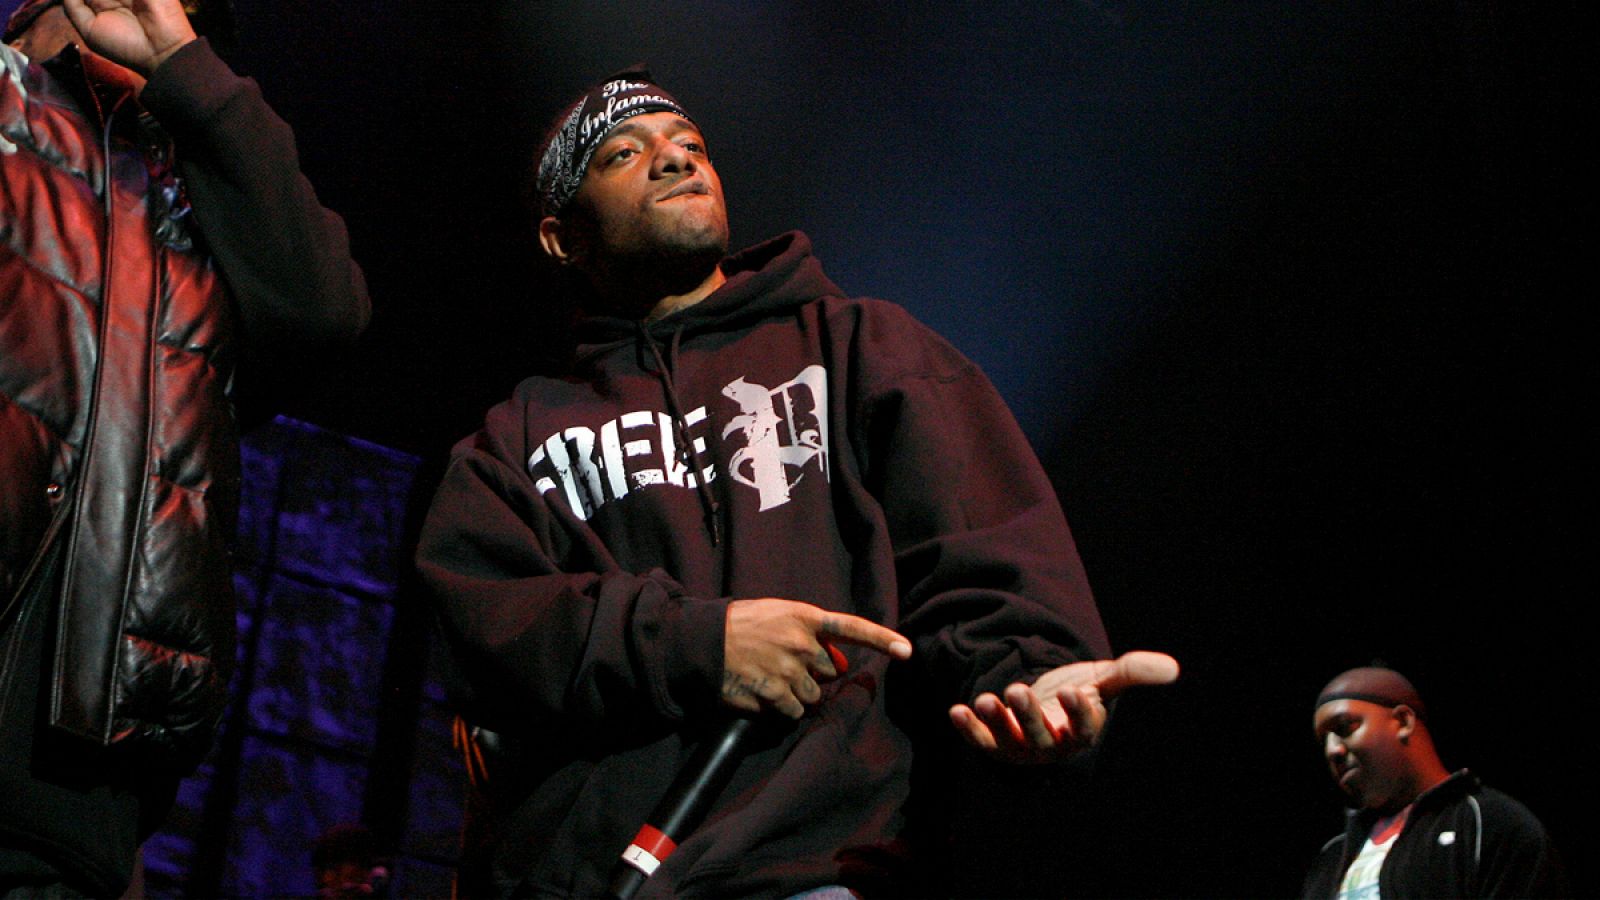 FILE PHOTO: Rapper Prodigy of the group "Mobb Deep" performs during the J.A.M. Awards in New York